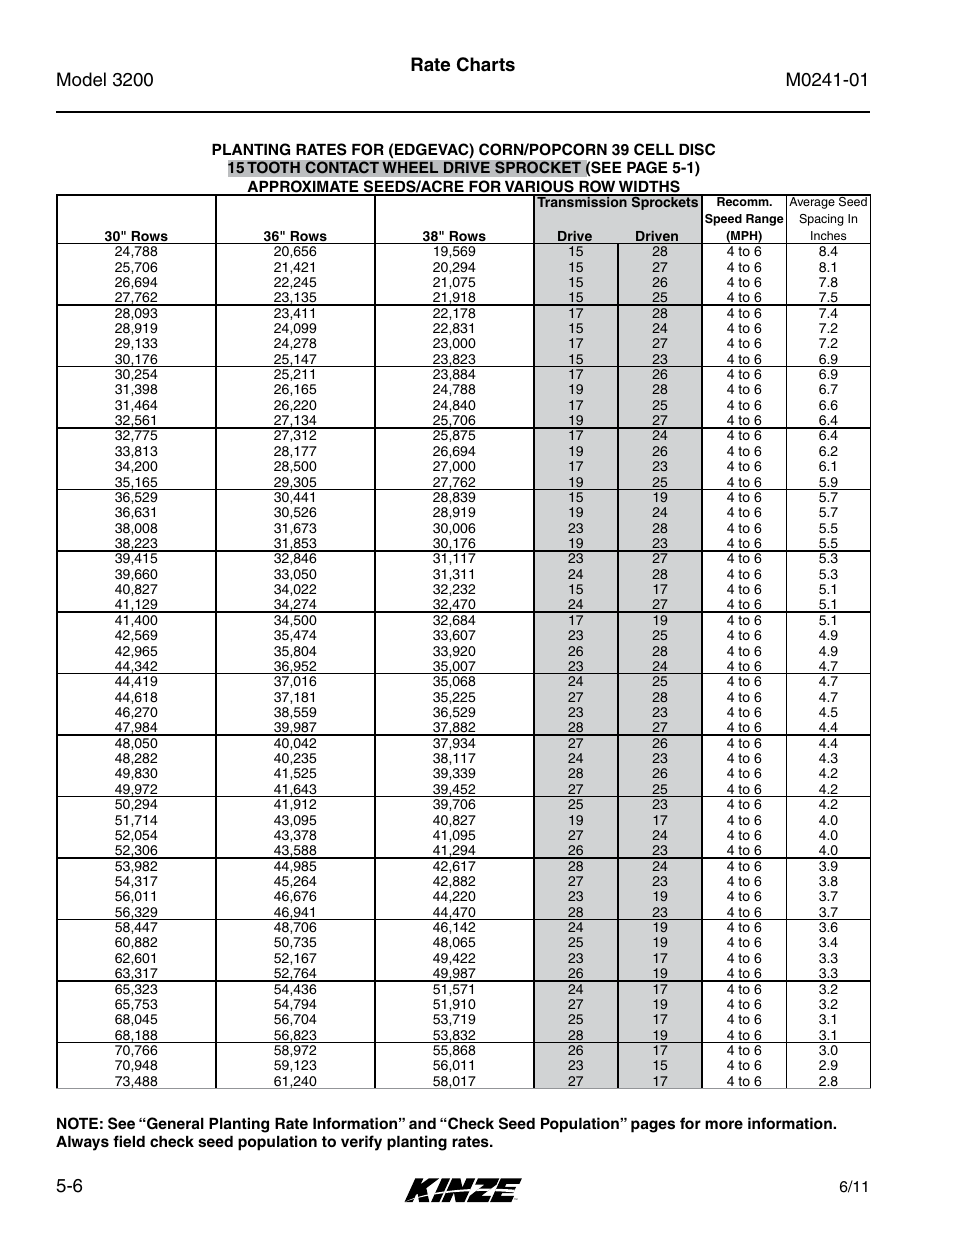 Rate charts | Kinze 3200 Wing-Fold Planter Rev. 7/14 User Manual | Page 72 / 192